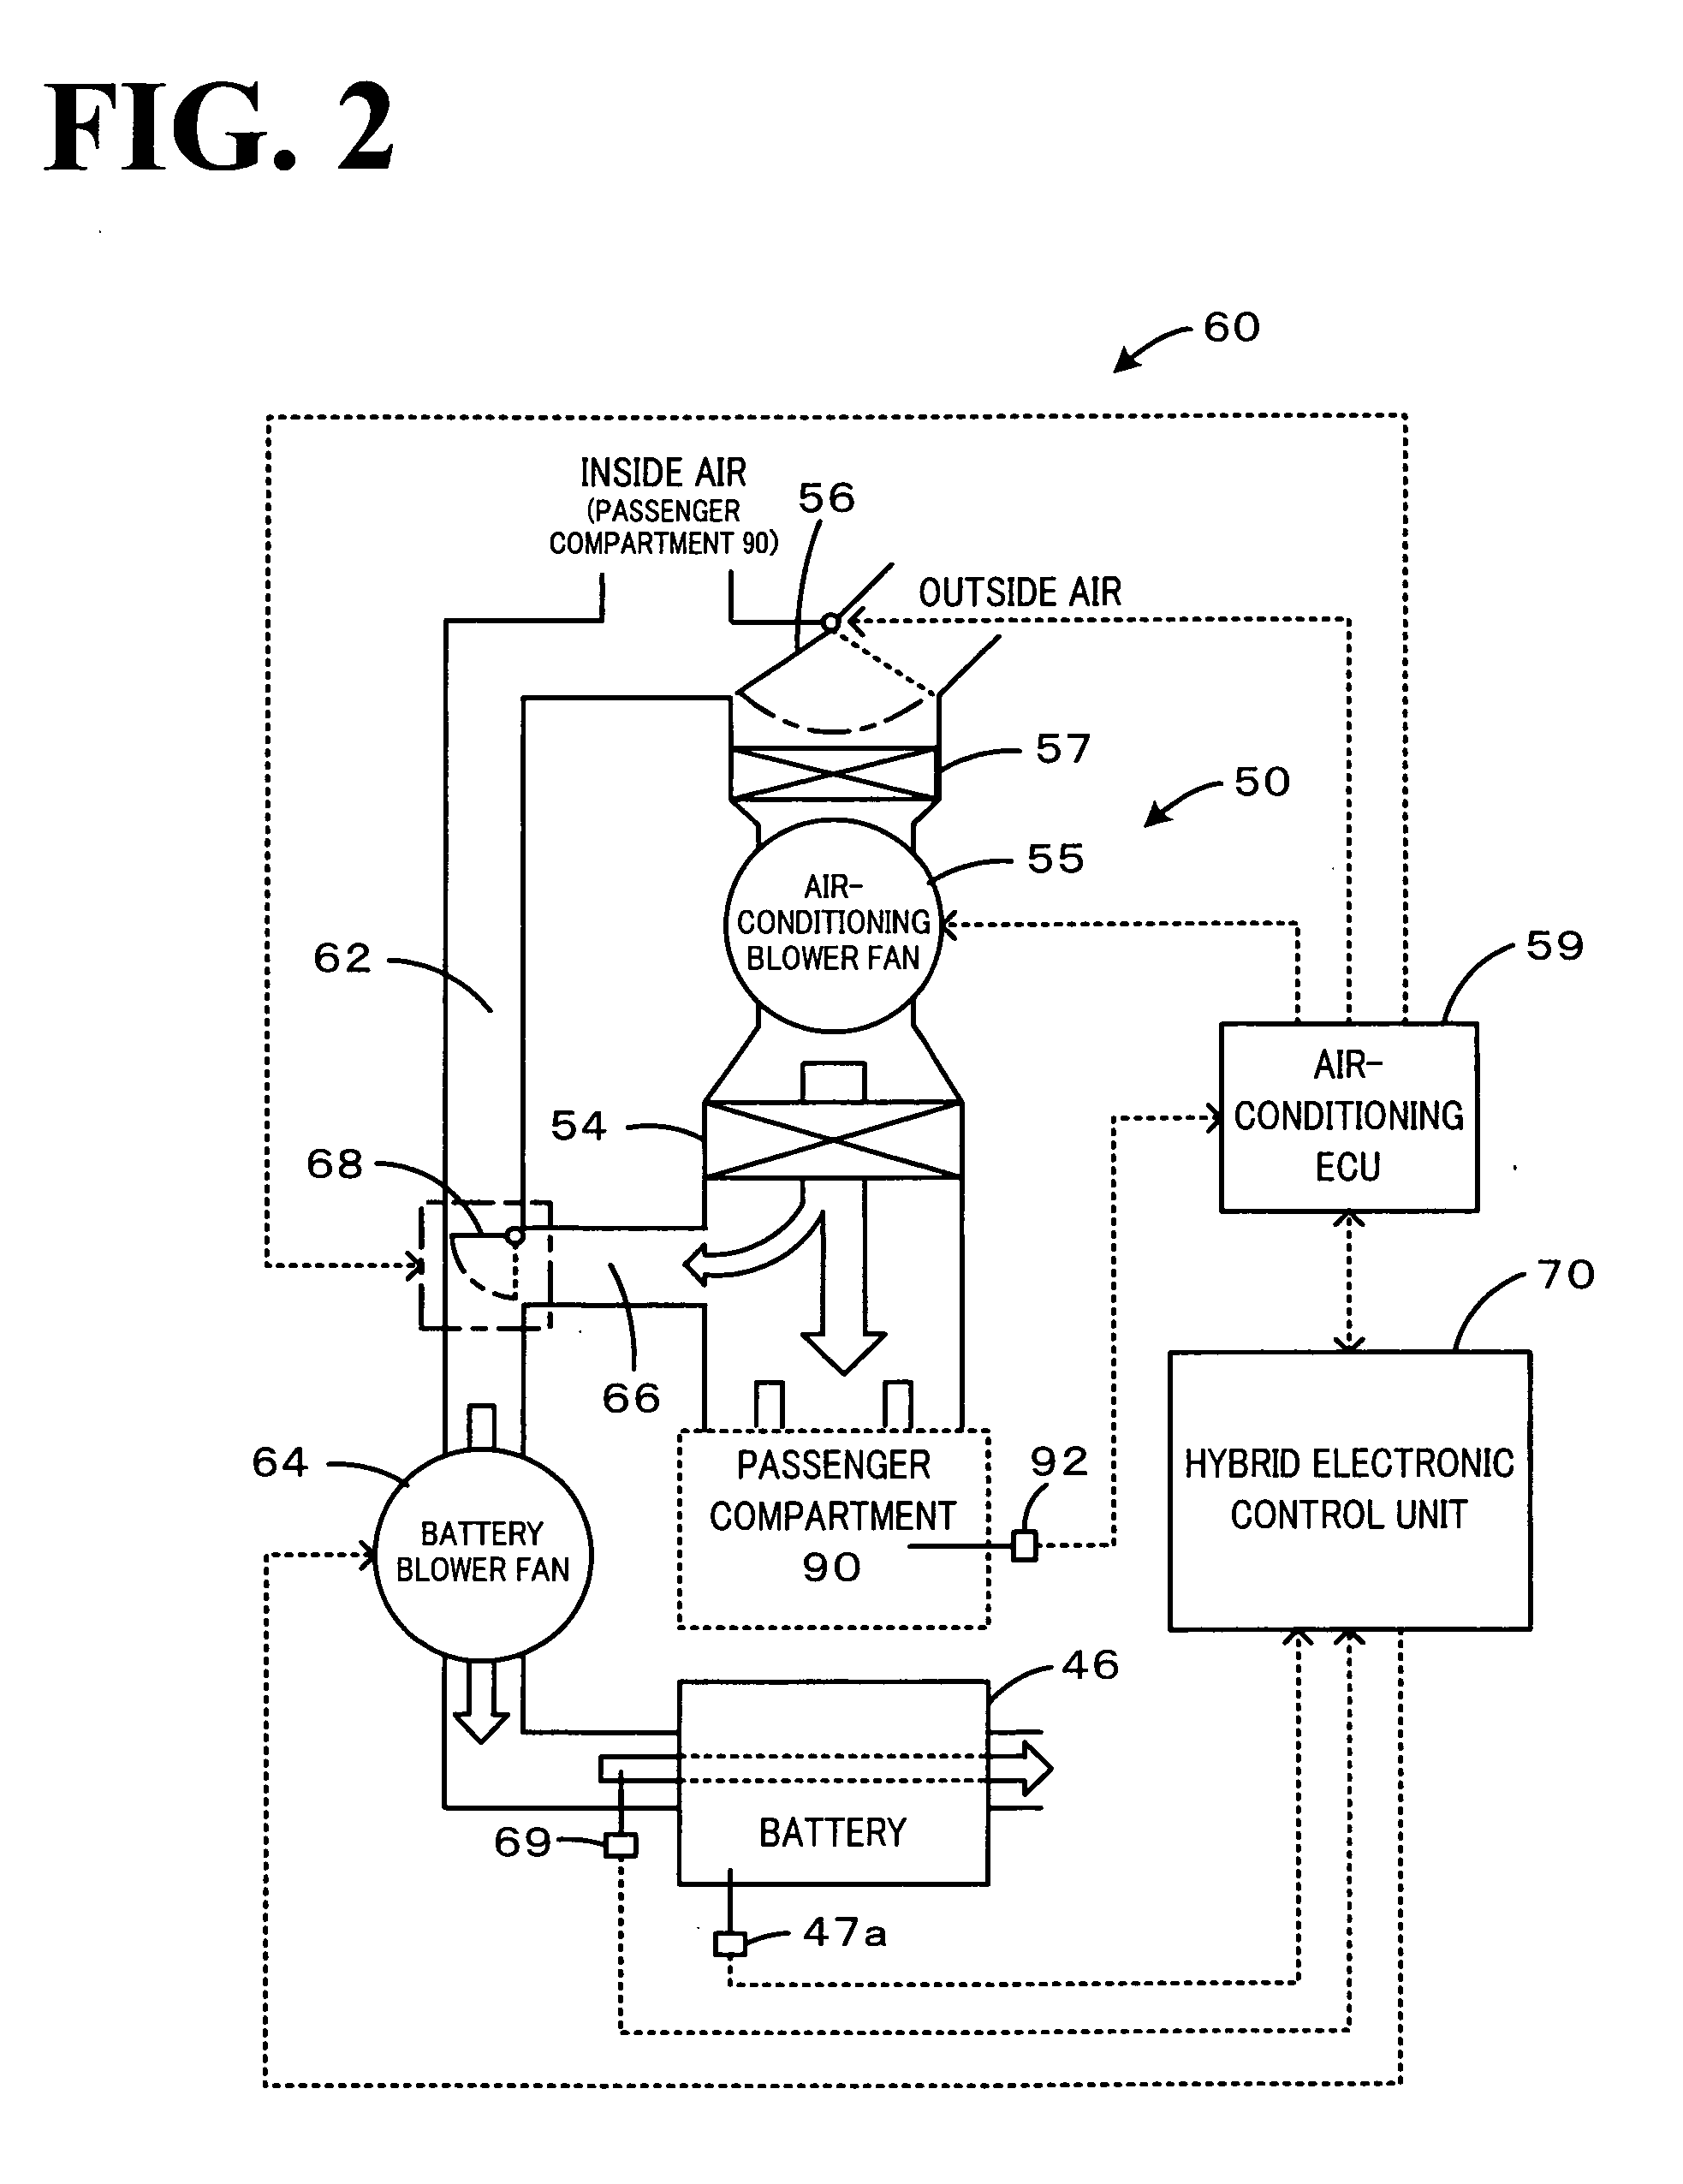 Cooling system and control method of cooling system